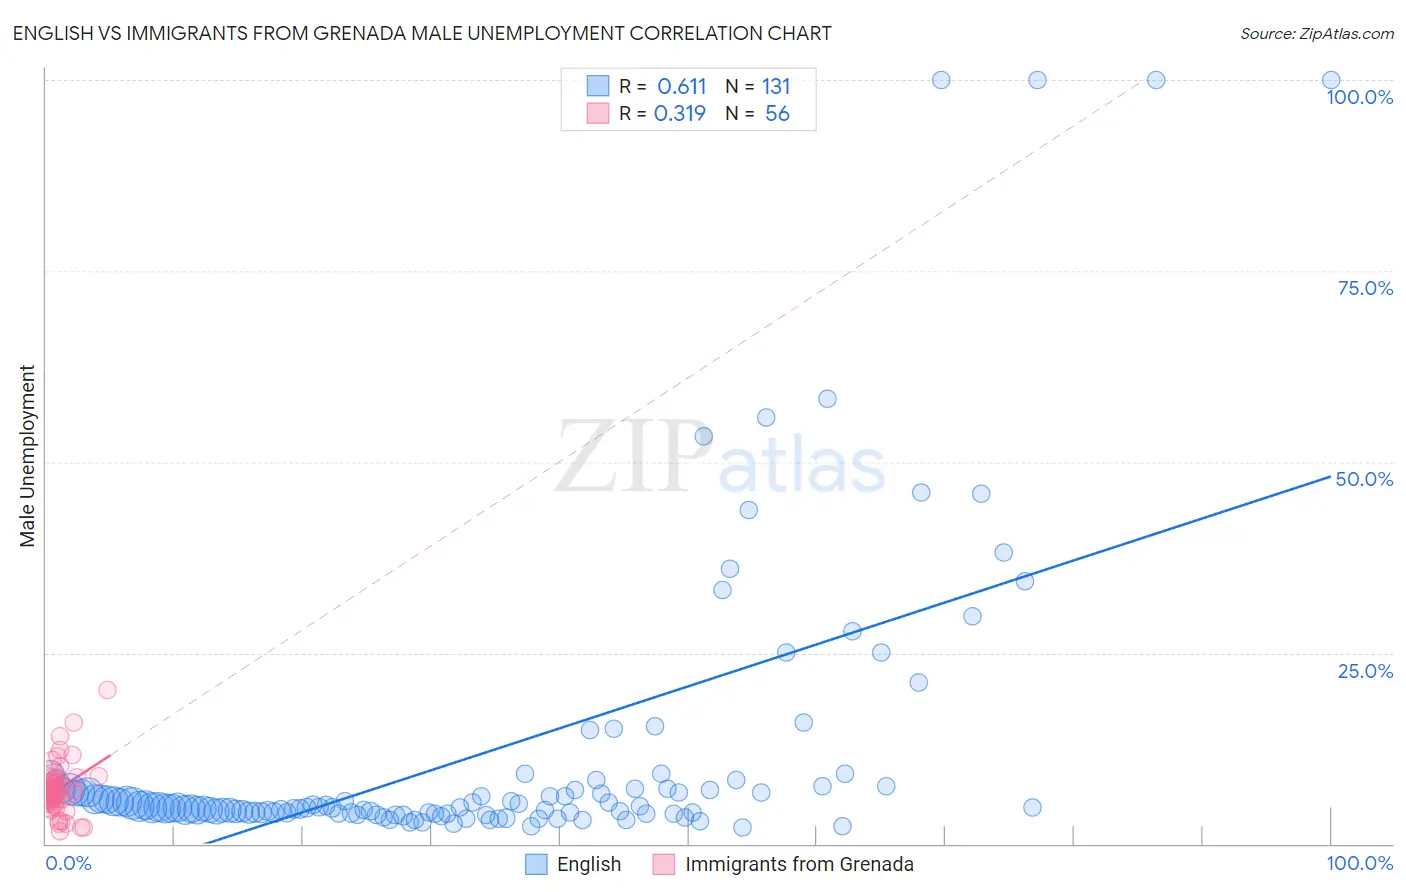 English vs Immigrants from Grenada Male Unemployment